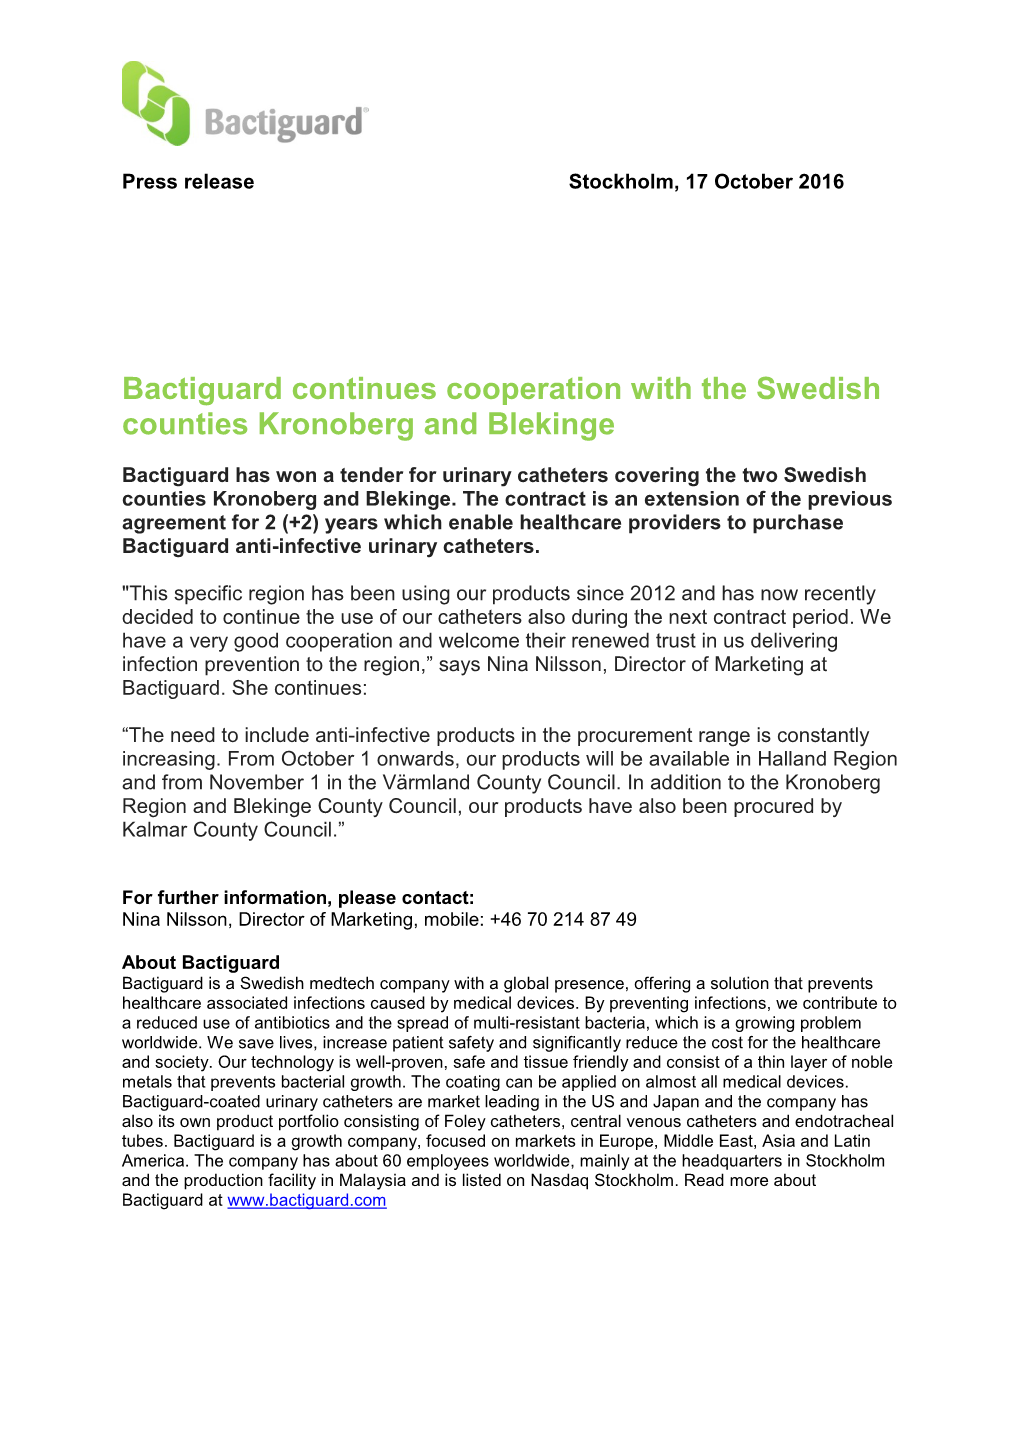 Bactiguard Continues Cooperation with the Swedish Counties Kronoberg and Blekinge